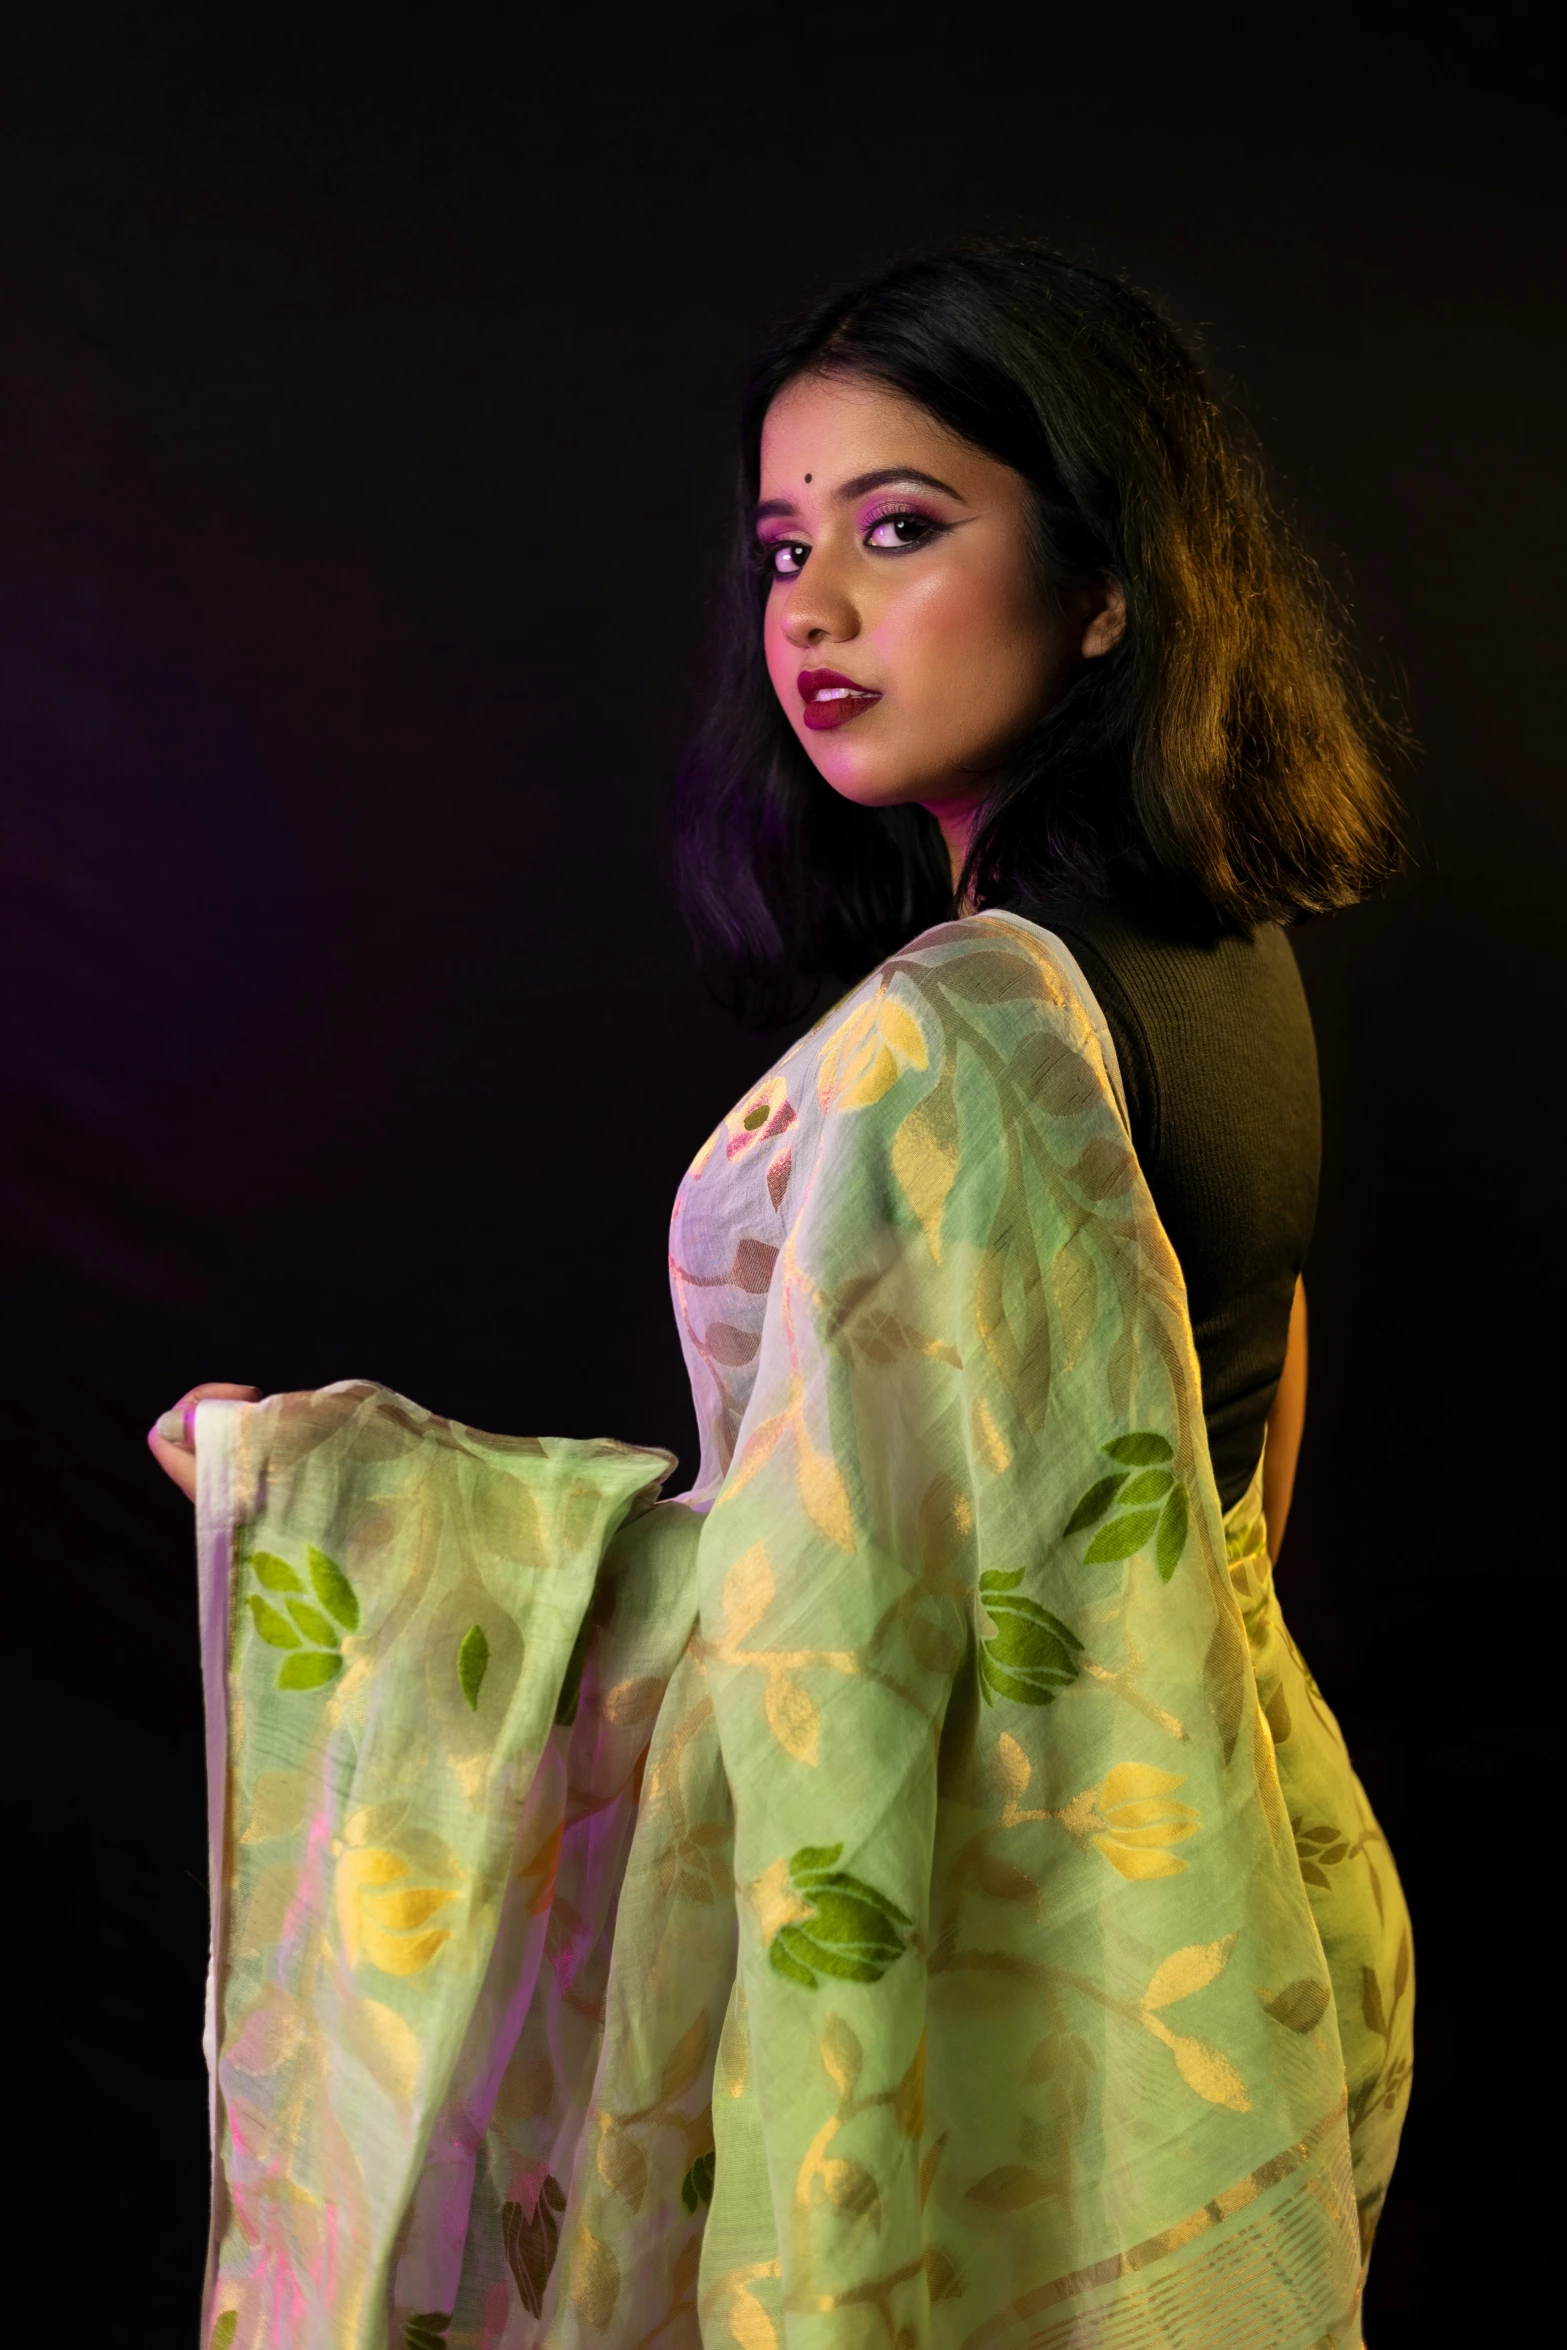 a beautiful young woman carrying a colorful yellow and green cloth